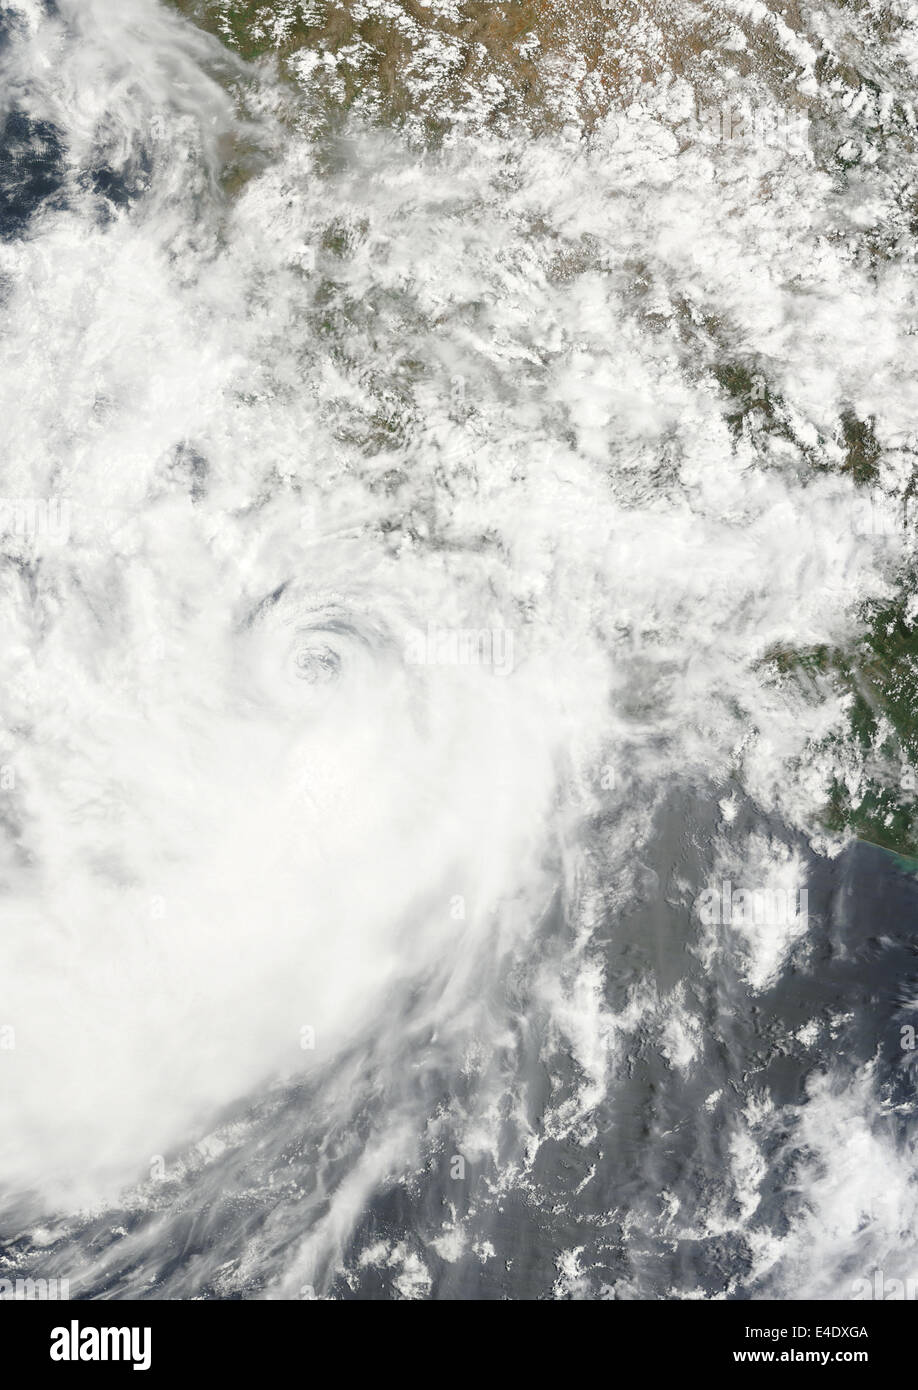 Hurricane Andres, Mexico, In 2009, True Colour Satellite Image. Hurricane Andres on 23 June 2009 off the coast of Mexico over th Stock Photo